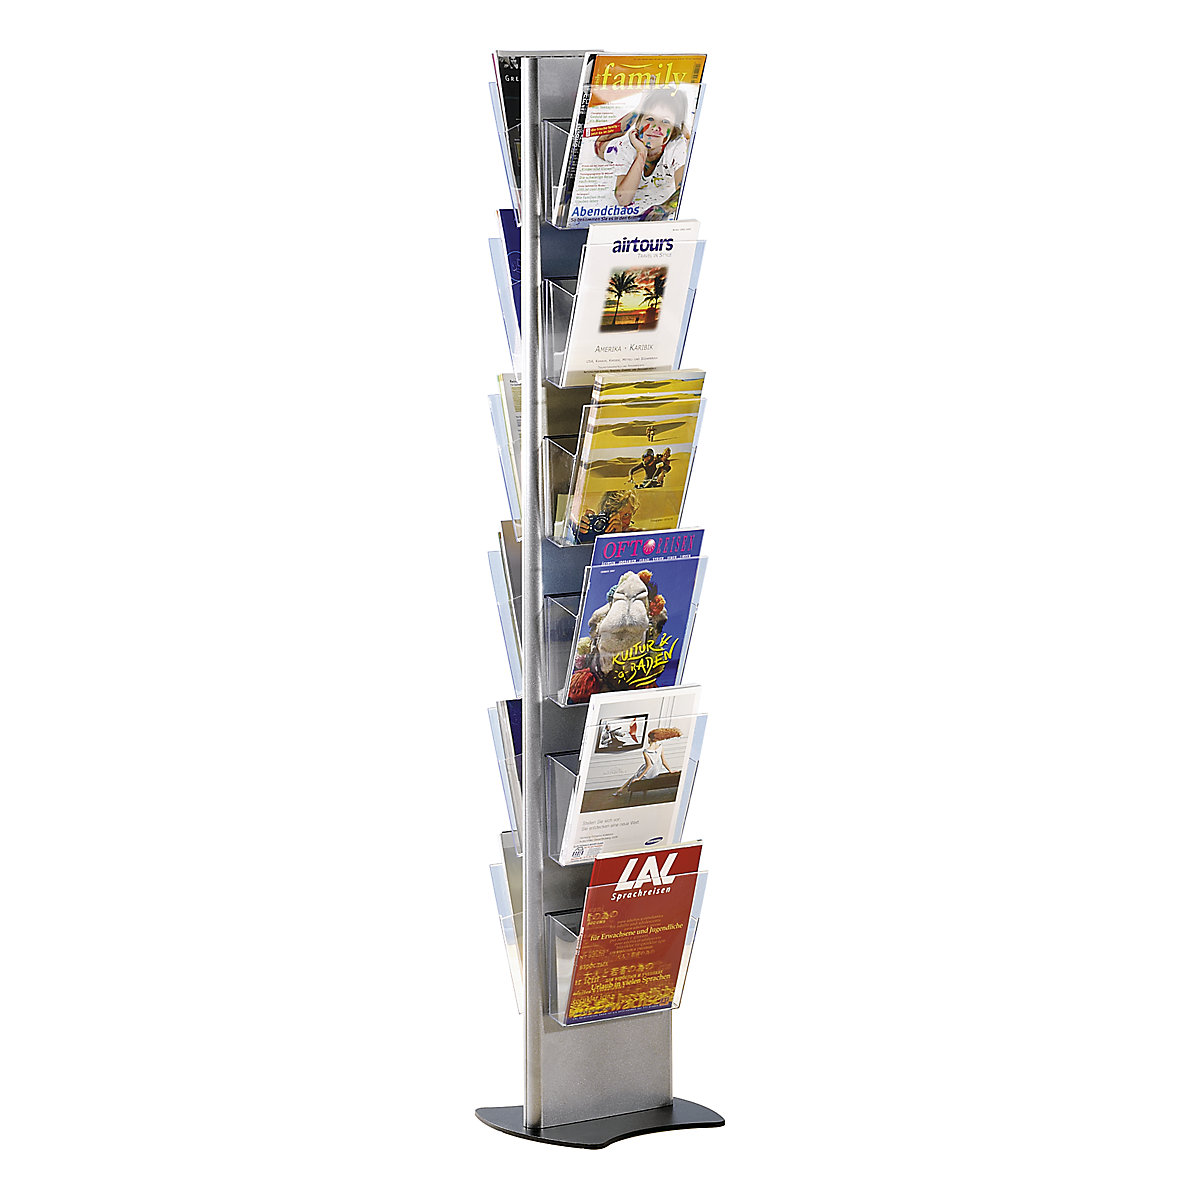 A4 BROCHURE LITERATURE DISPLAY STAND MAGAZINE RACK FOR RECEPTION TROLLEY LEAFLET 